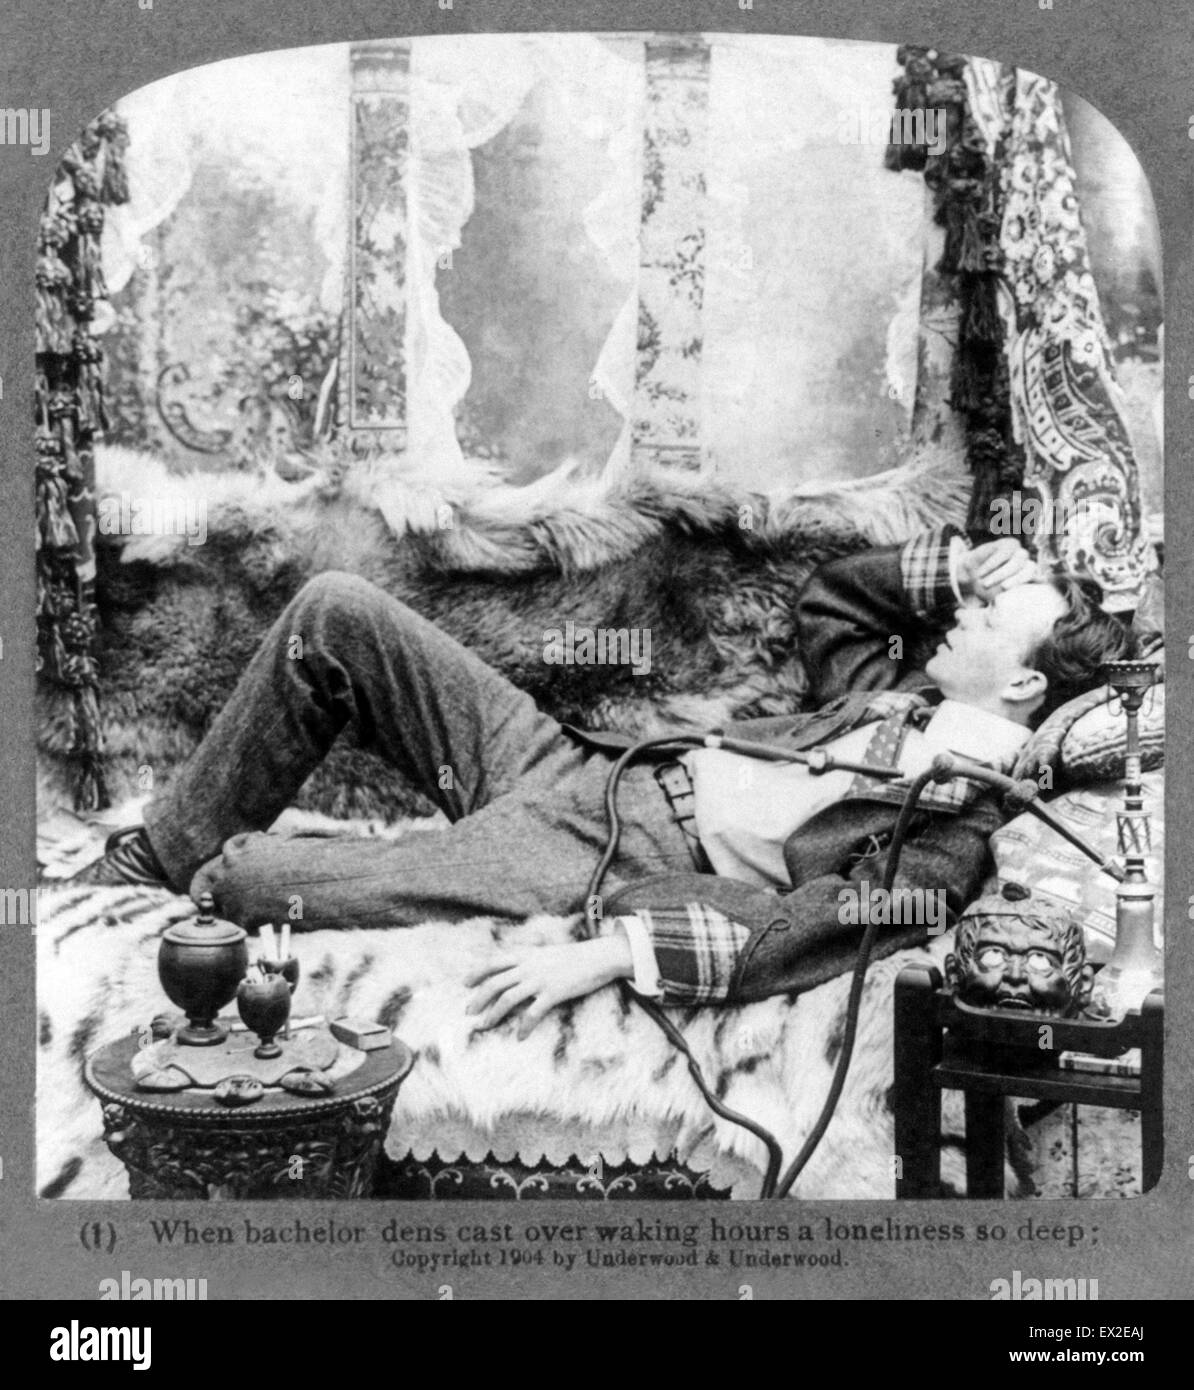 Romanticized studio portrait of opium use entitled 'When bachelor dens cast over waking hours a loneliness so deep.' Image shows a young man relaxing on a fur covered chaises lounge with a hookah on the left and various smoking equipment on the left. This romanticized view of carefree opium use started with De Quincey's popular 'Confessions of an English Opium-Eater' and endured until the 1920's. Image from a stereograph released by Underwood & Underwood in 1904. Stock Photo